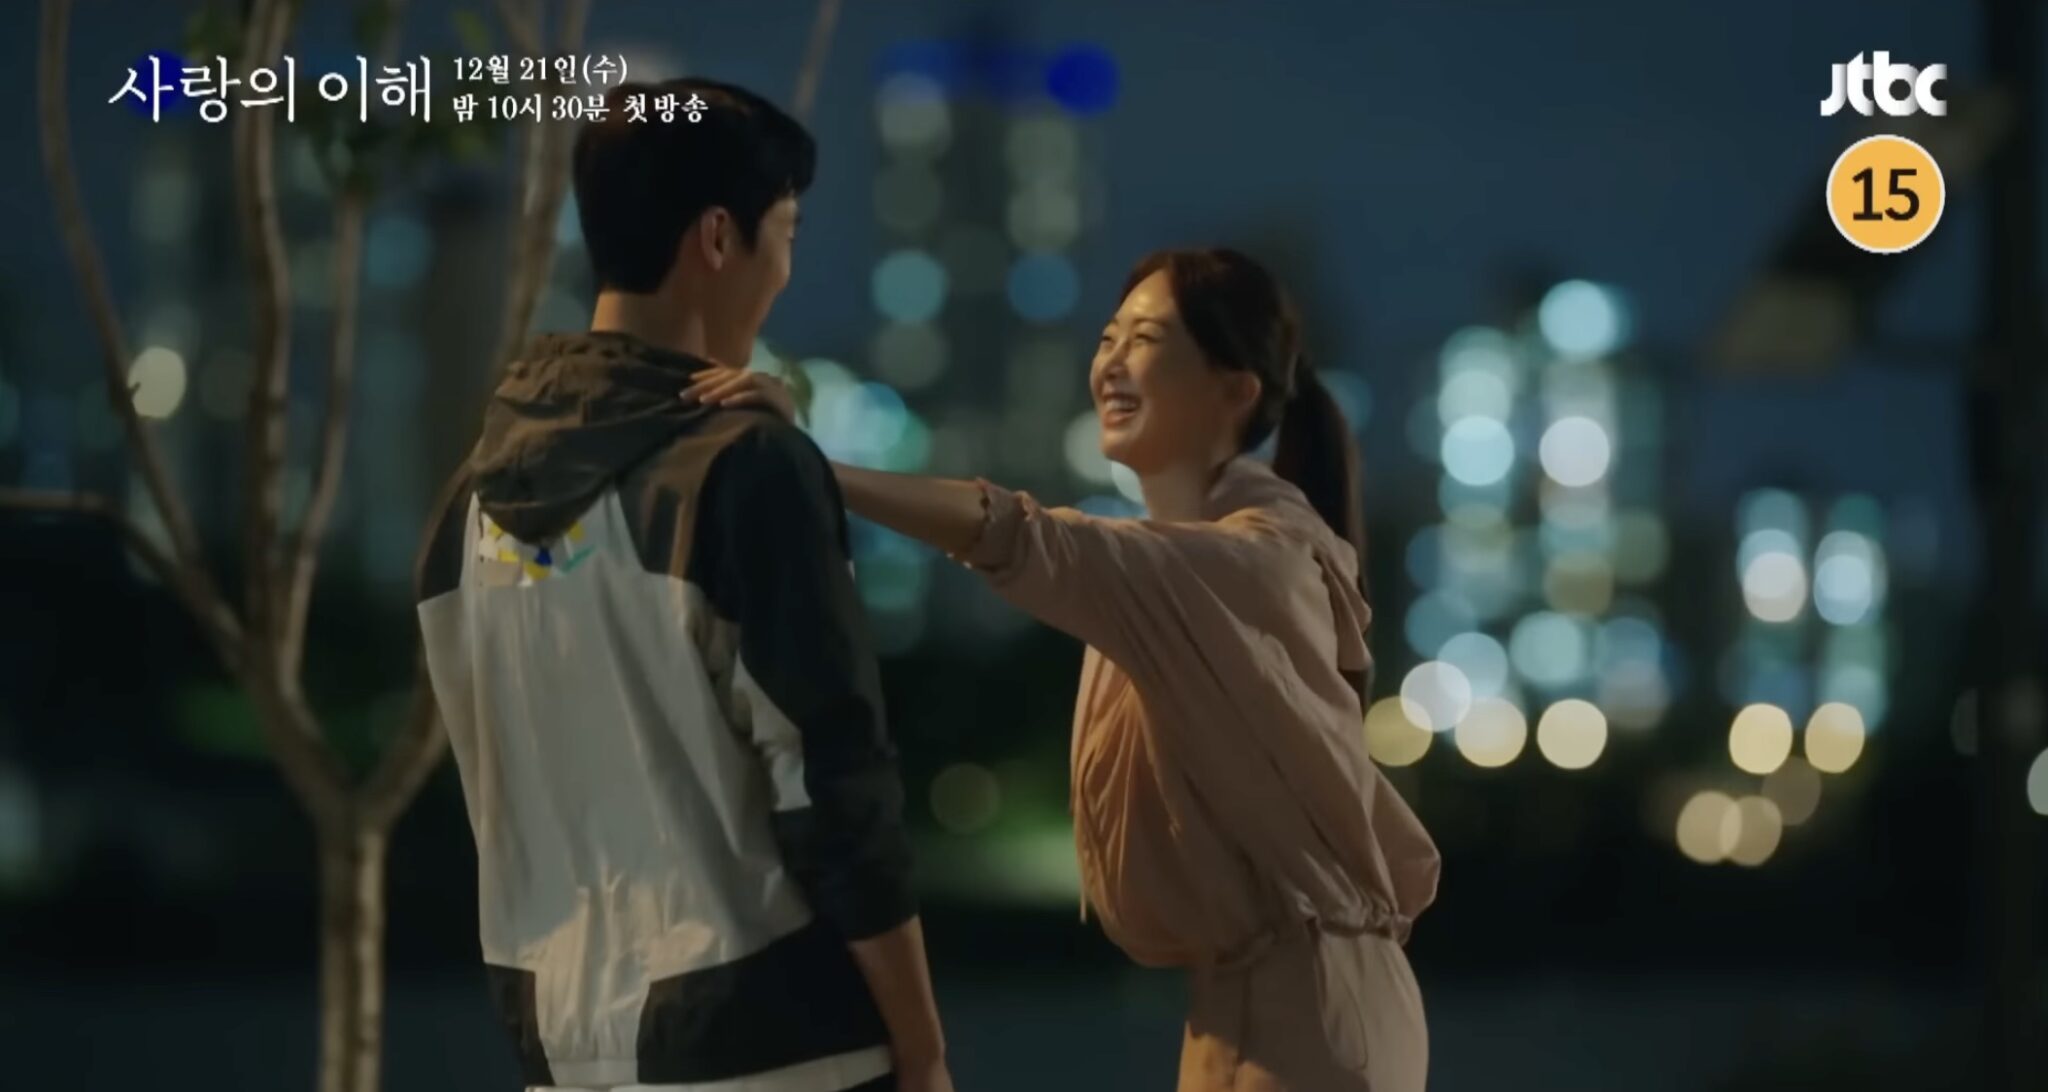 JTBC's Understanding of Love gives longing looks and love squares